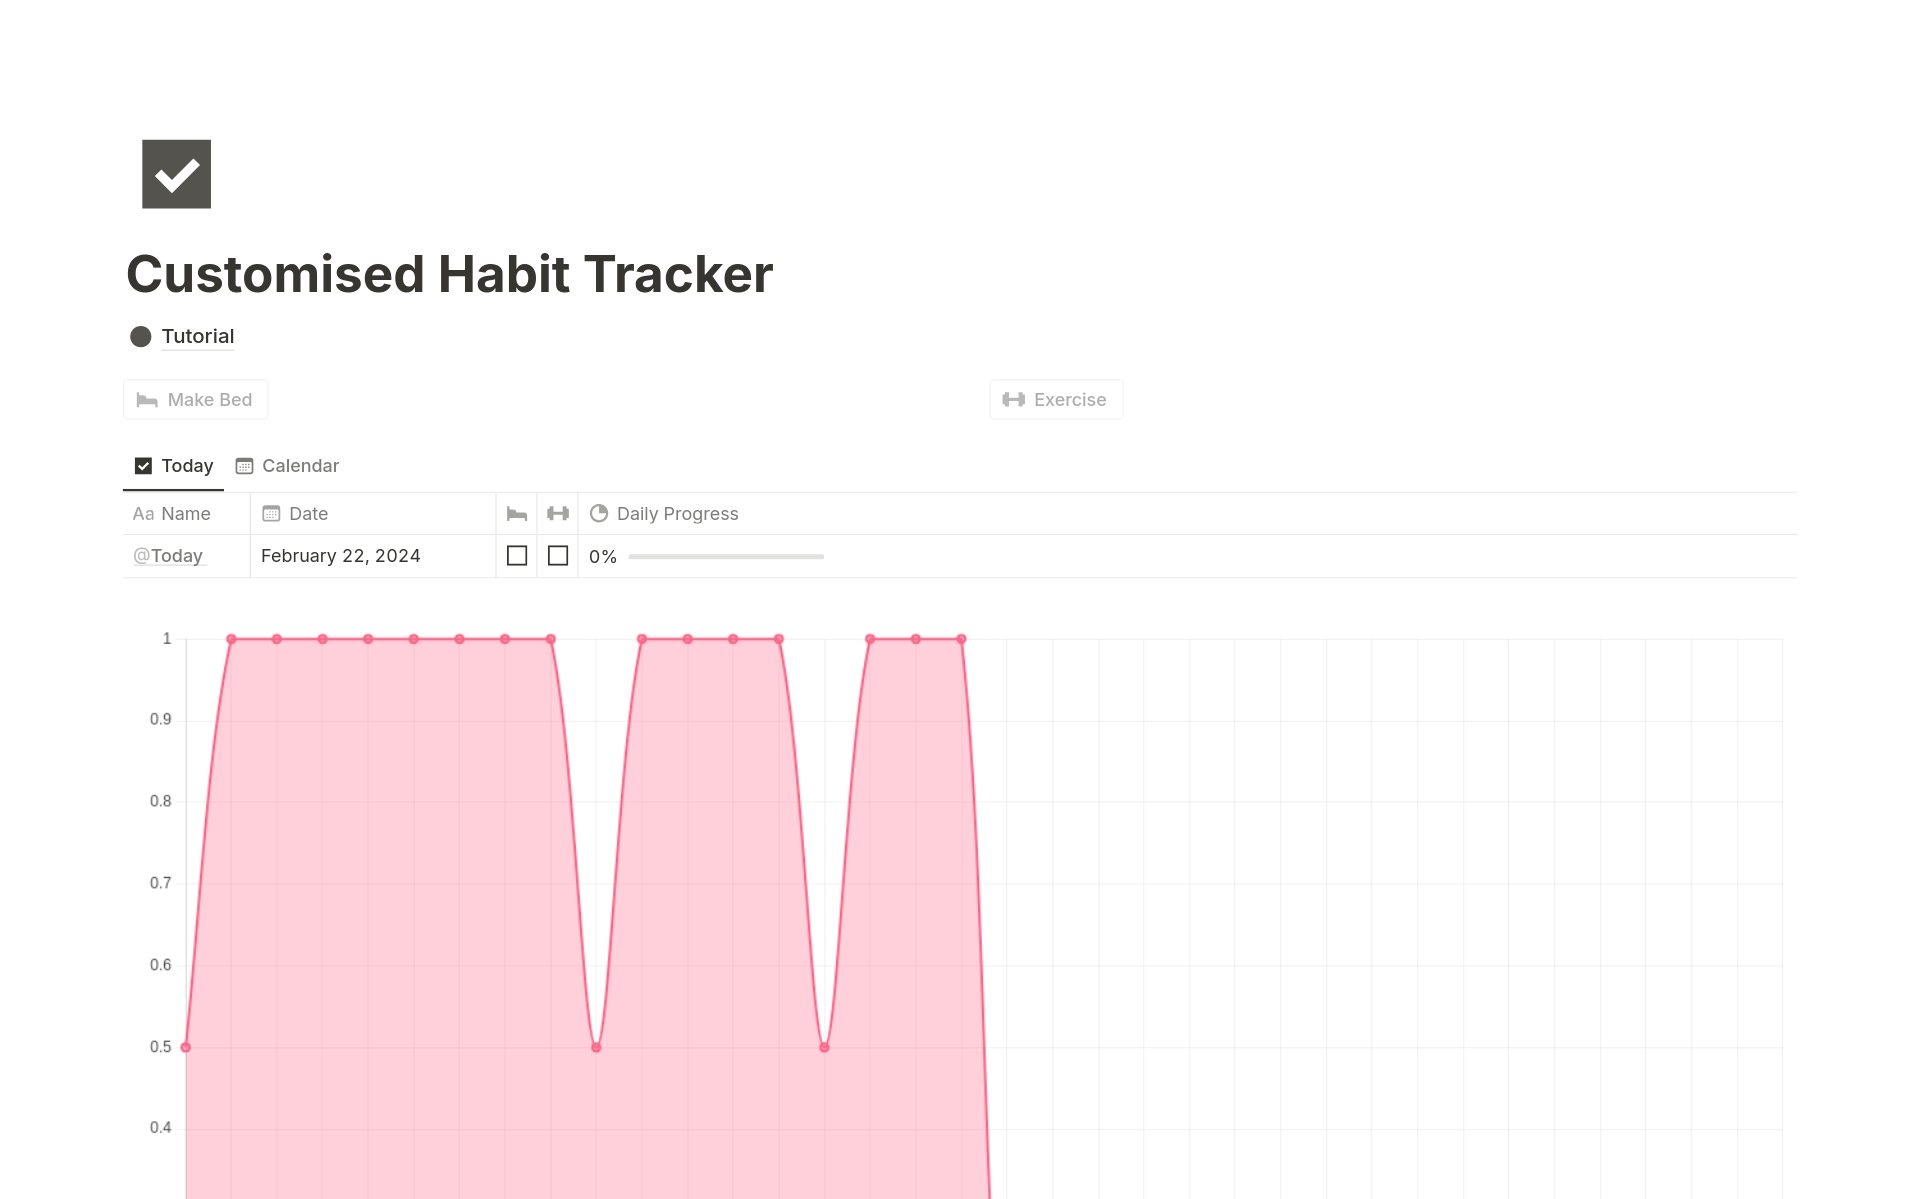 Tired of generic habit trackers that can't adapt to your unique routine? Break free with our revolutionary template designed to align with YOUR lifestyle.